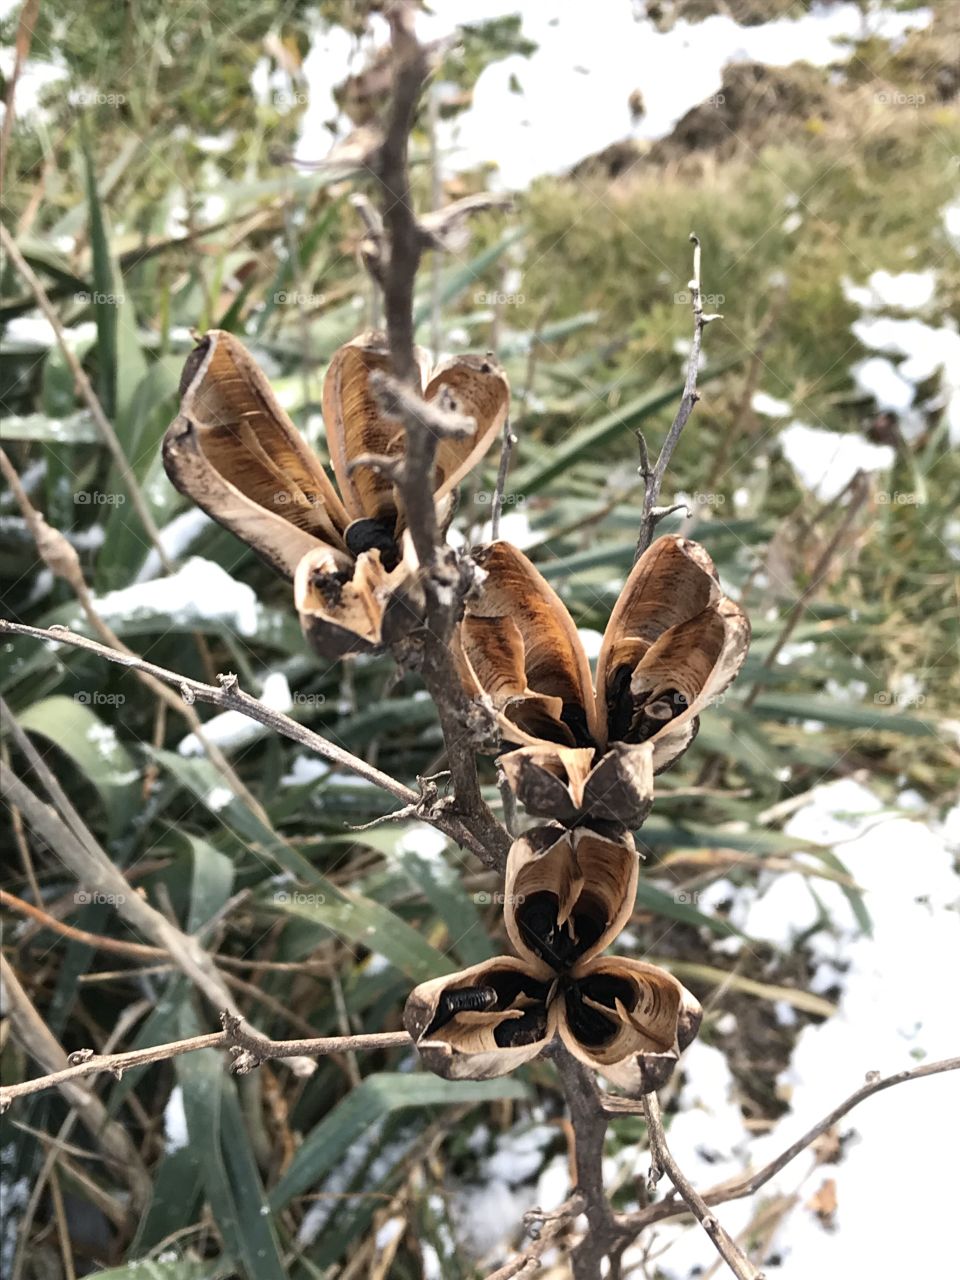 I don’t know what these are but they looked very interesting and amazing looking during winter. 